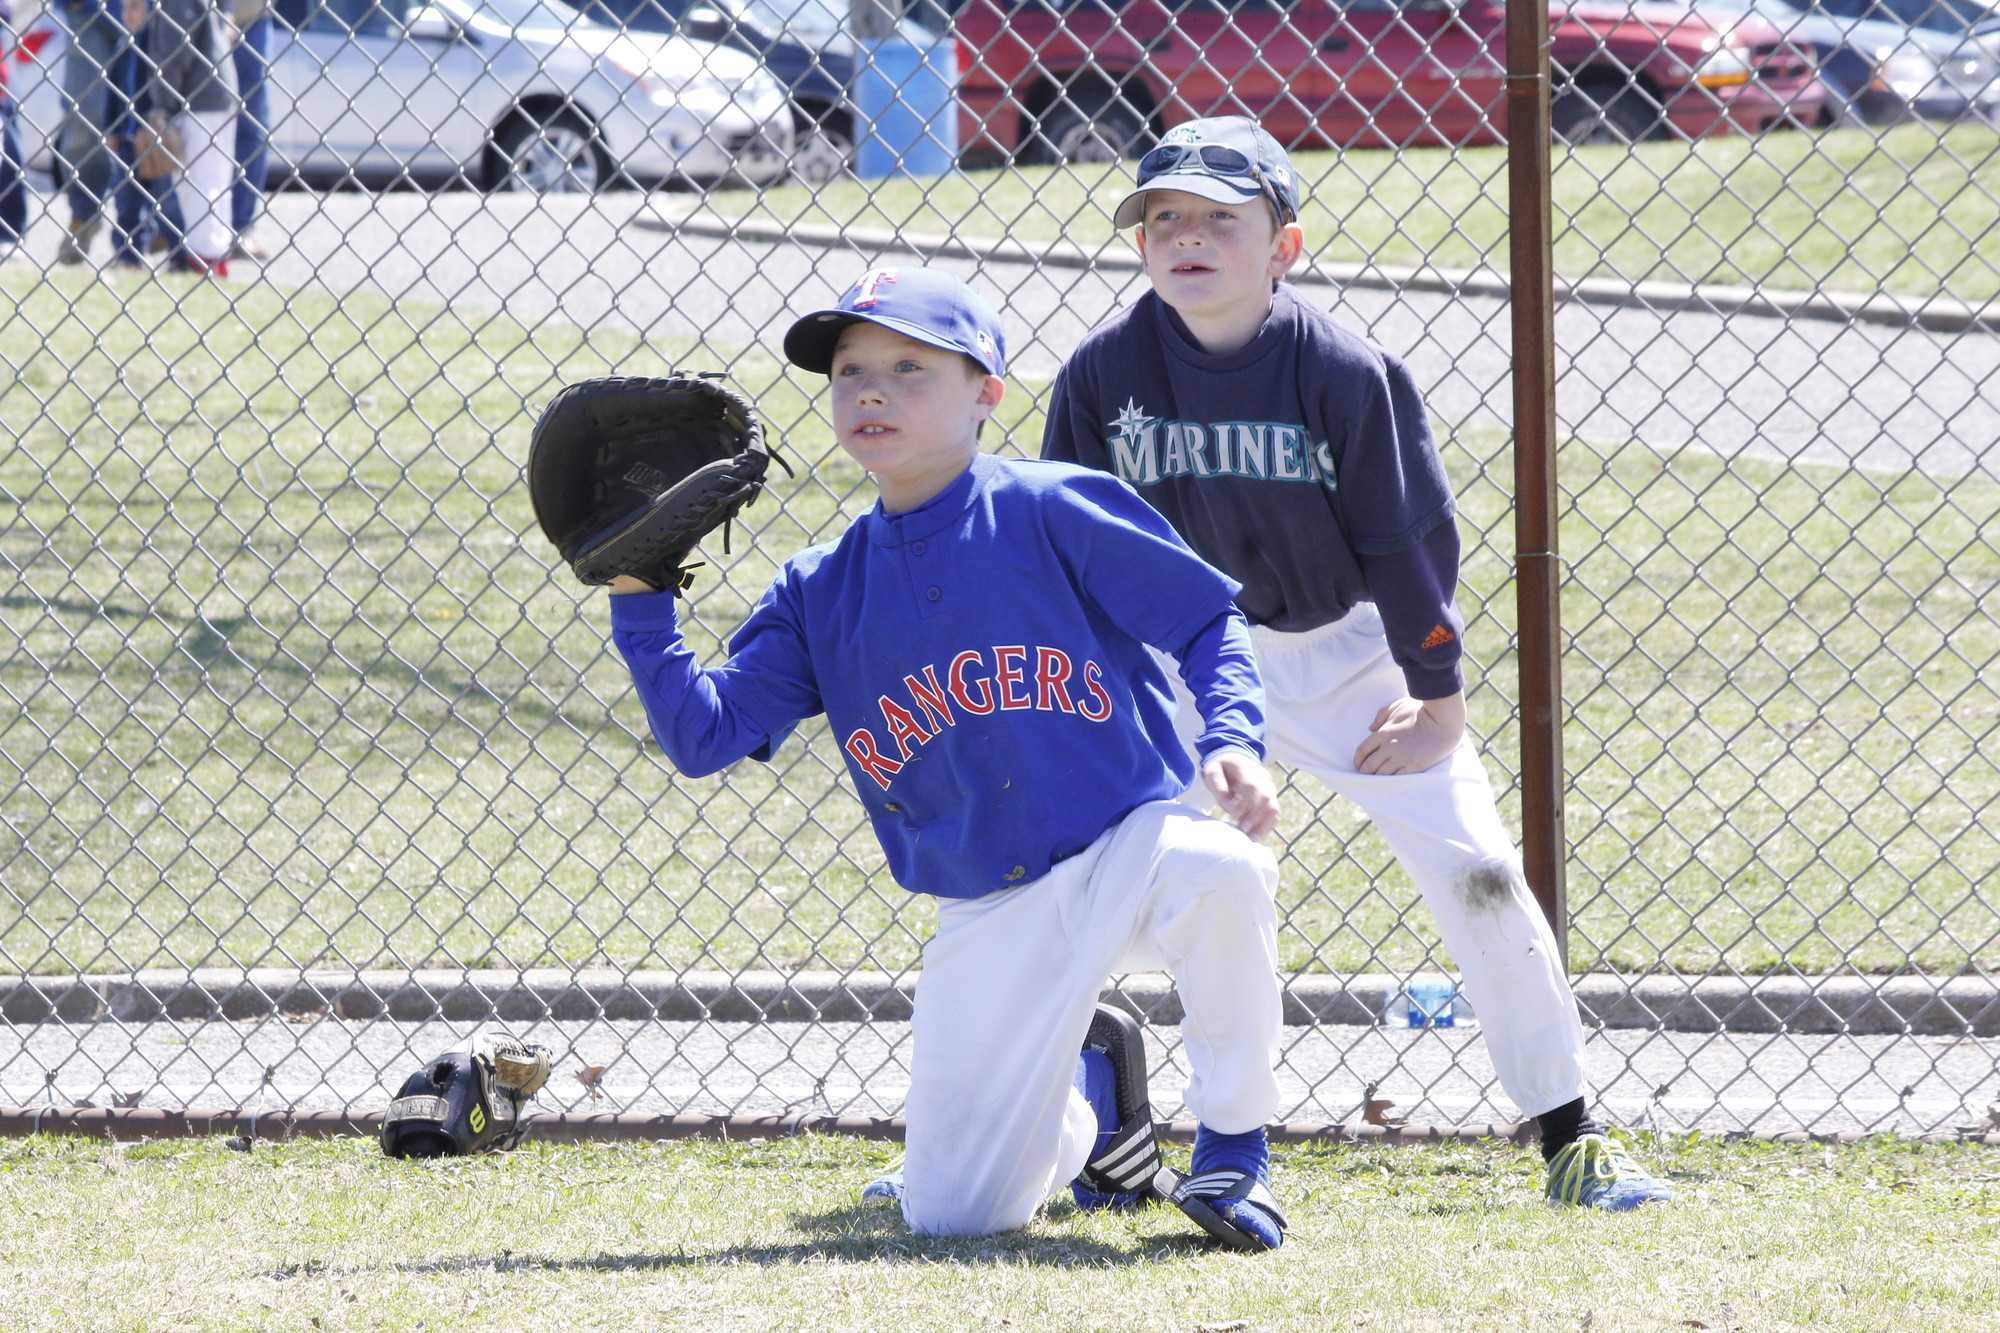 Michael Jazylo, of the Rangers, practiced catching while Logan Kirchner, of the Mariners, played the role of umpire.